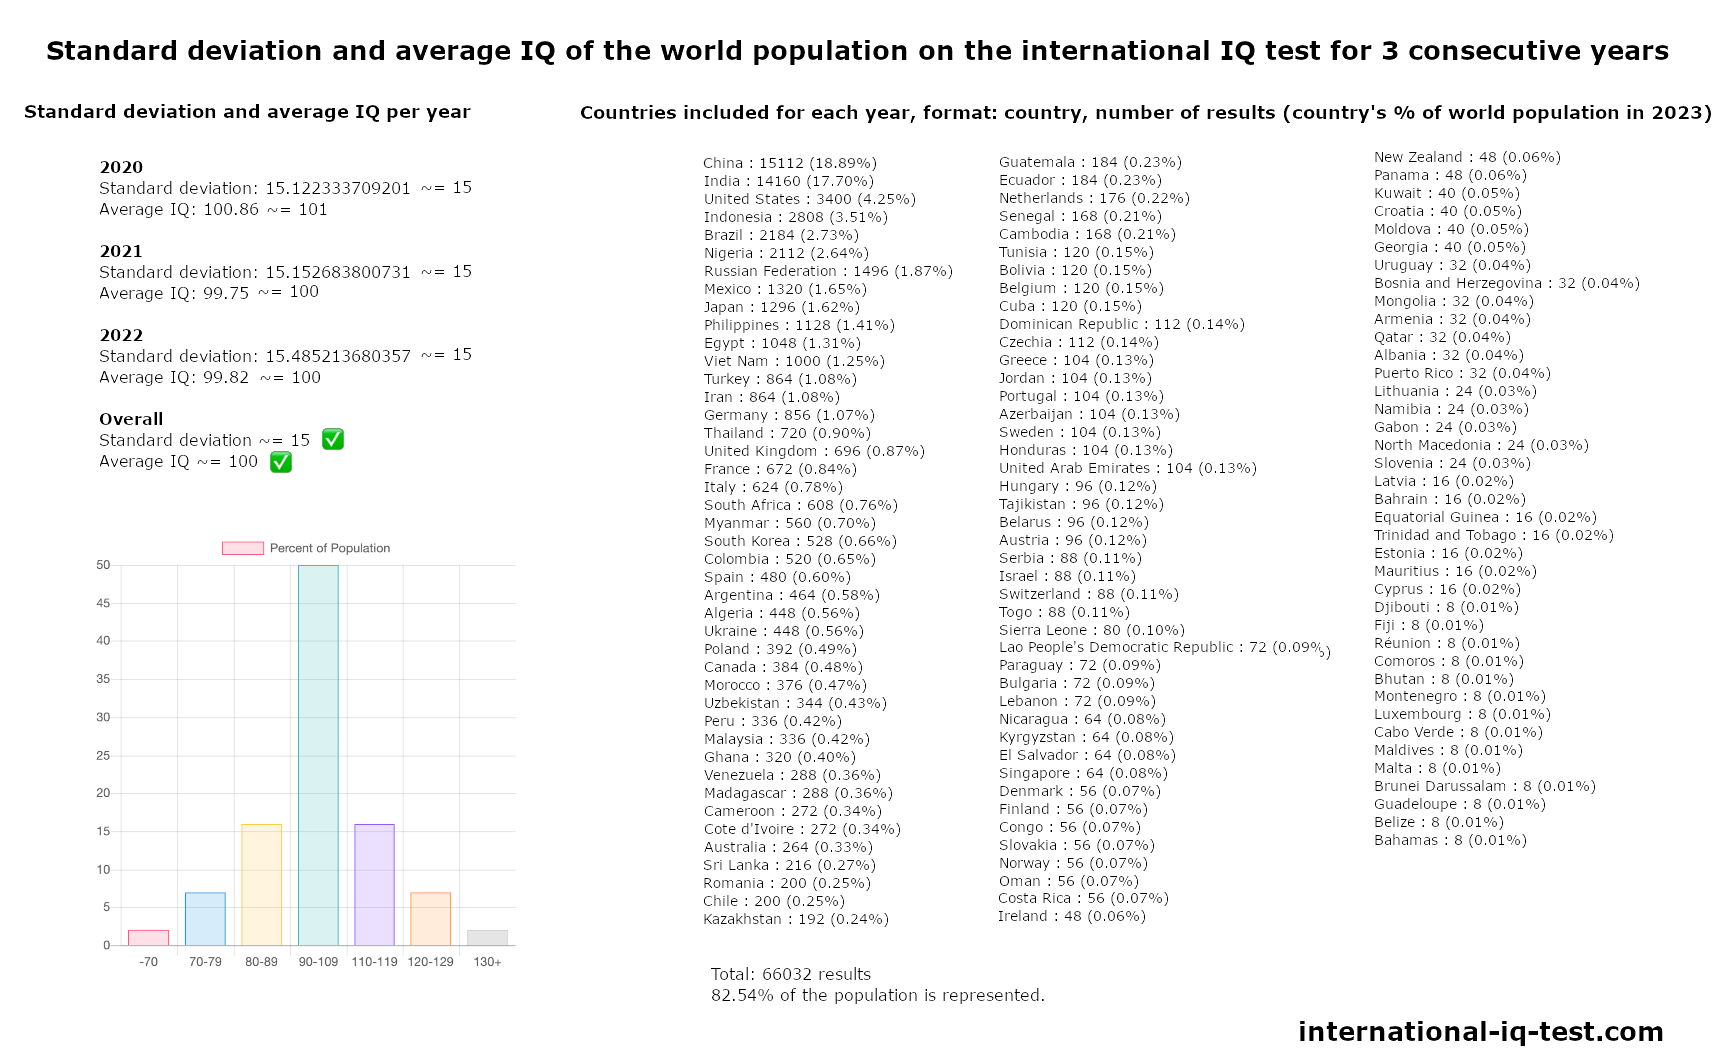 Standard deviation and average IQ of the world population on the international IQ test of years 2020, 2021 and 2022